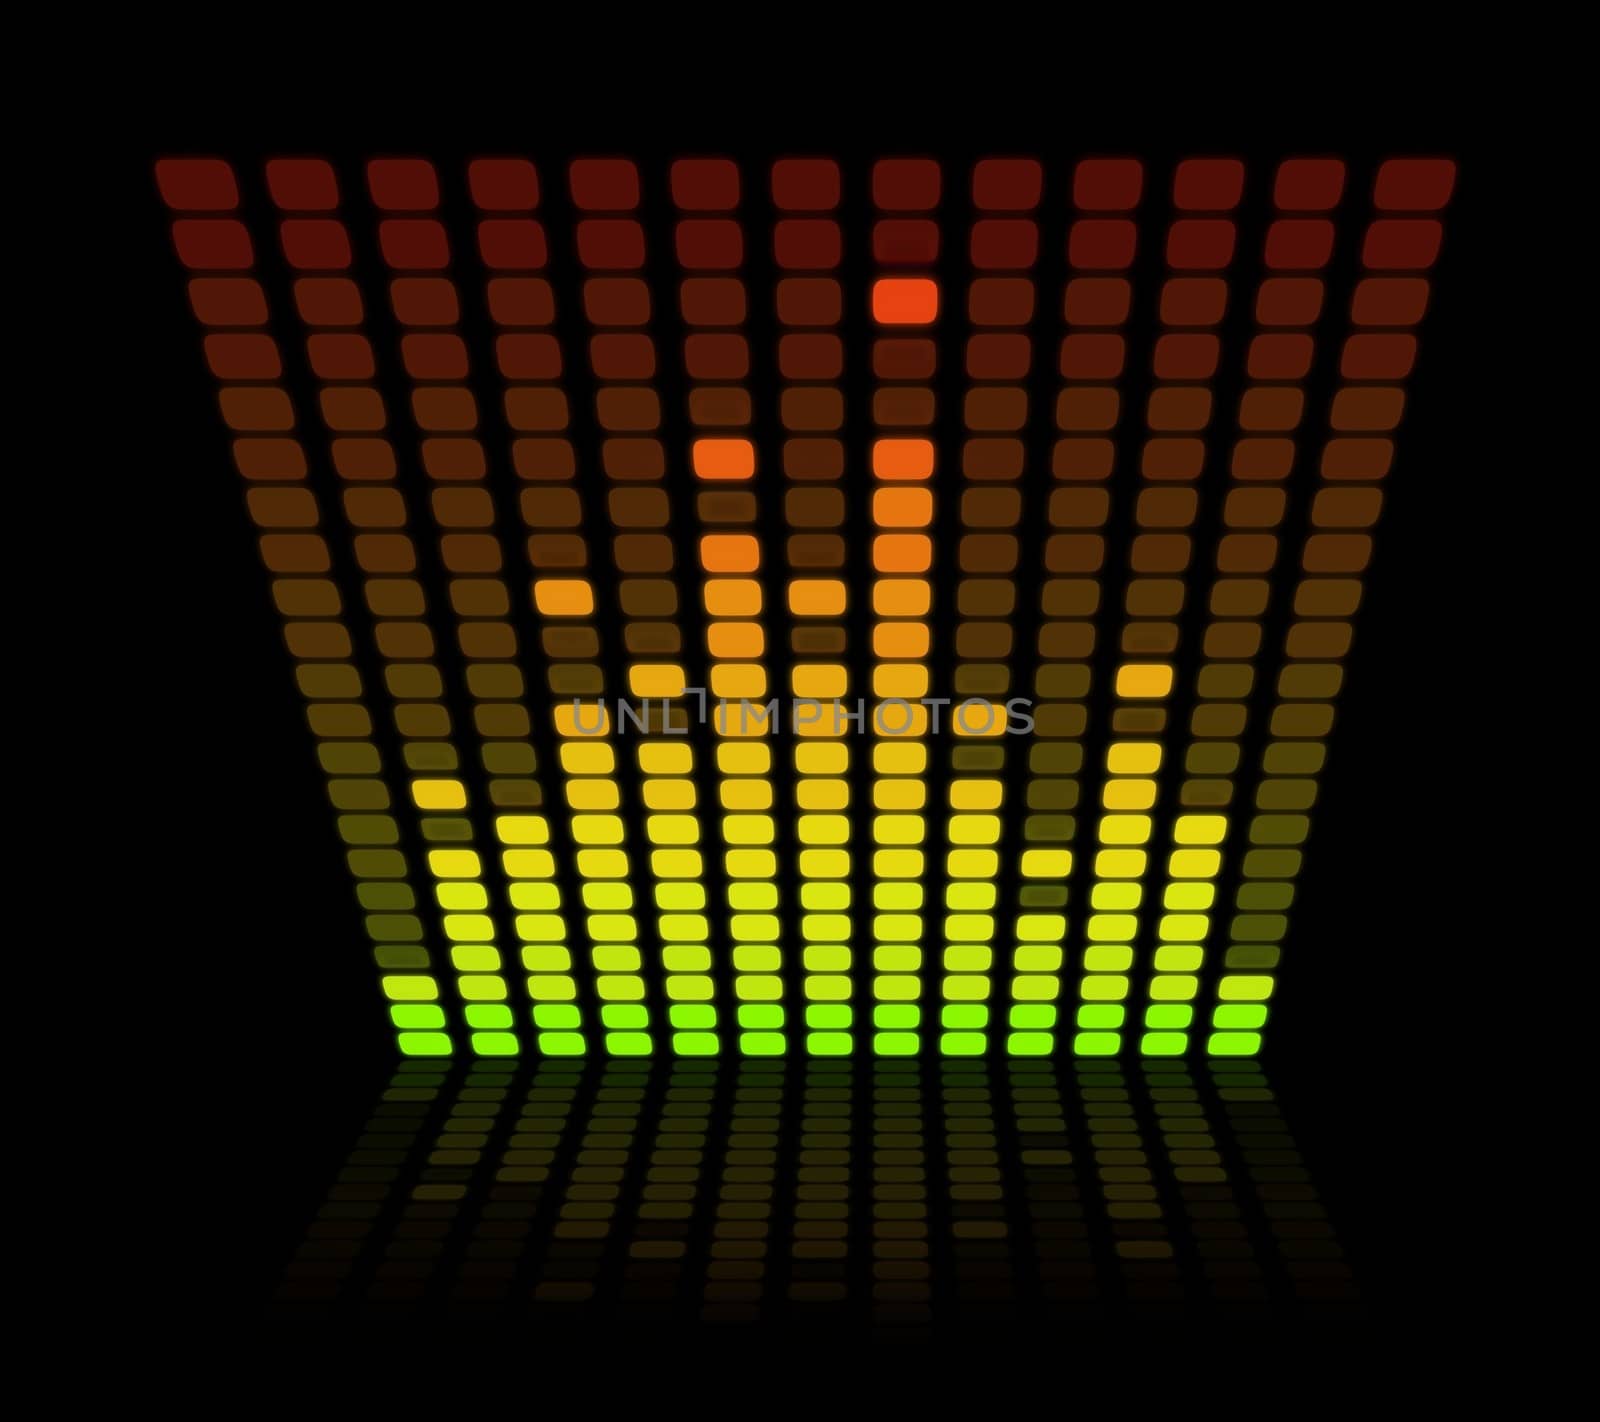 Illustration of a Graphic equalizer on a black background with slight reflection